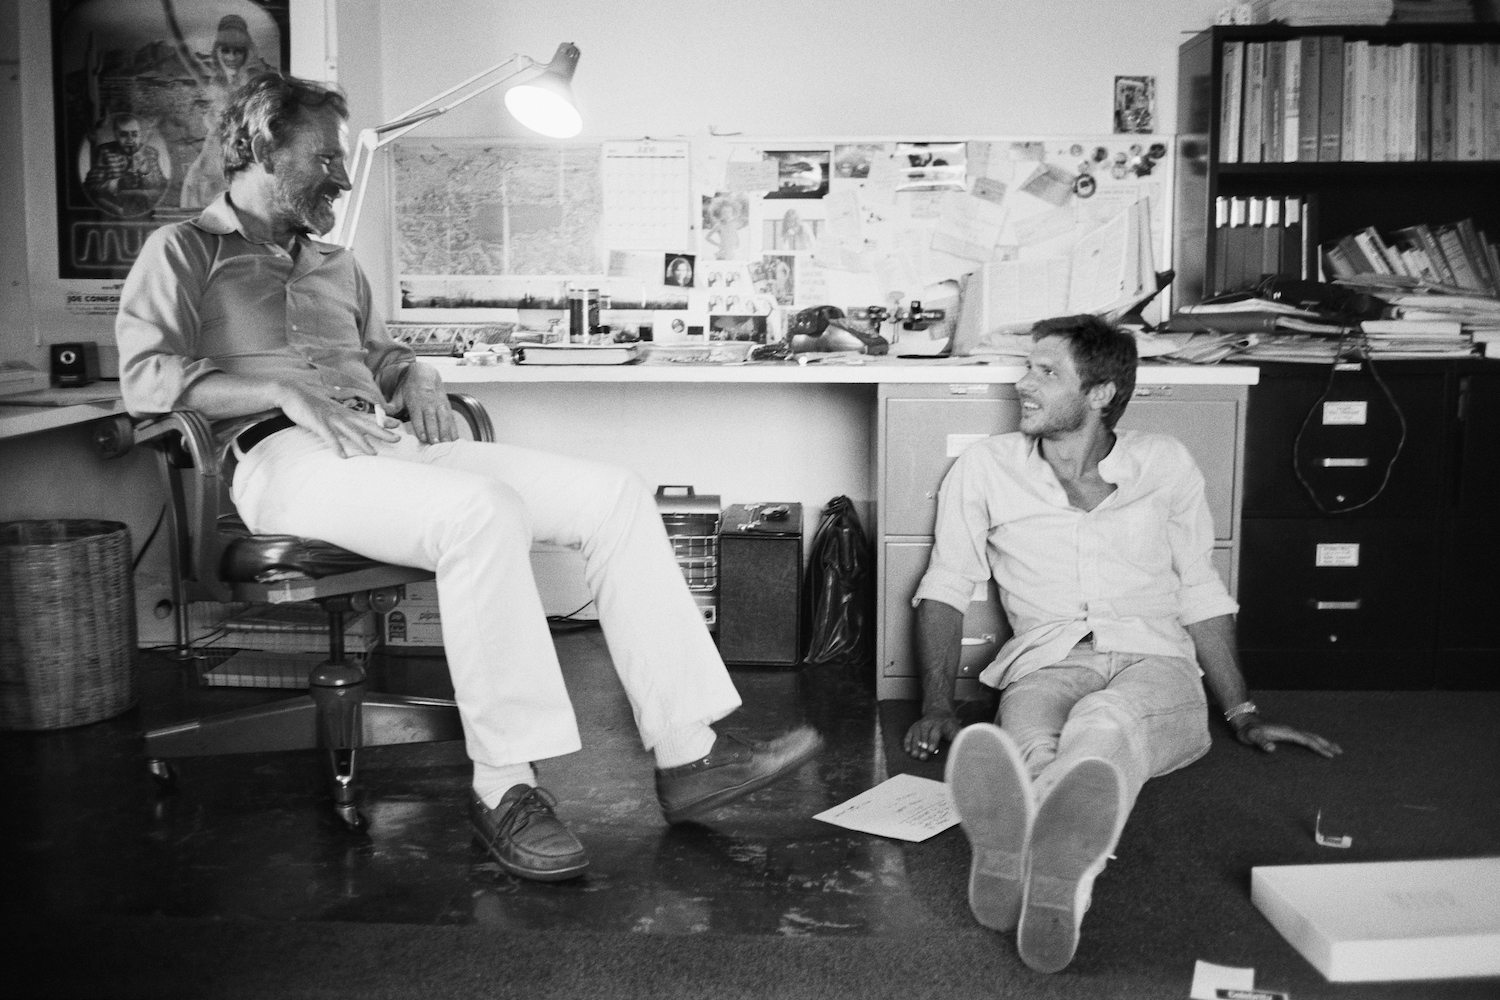 Harrison Ford and Ridley Scott in an office